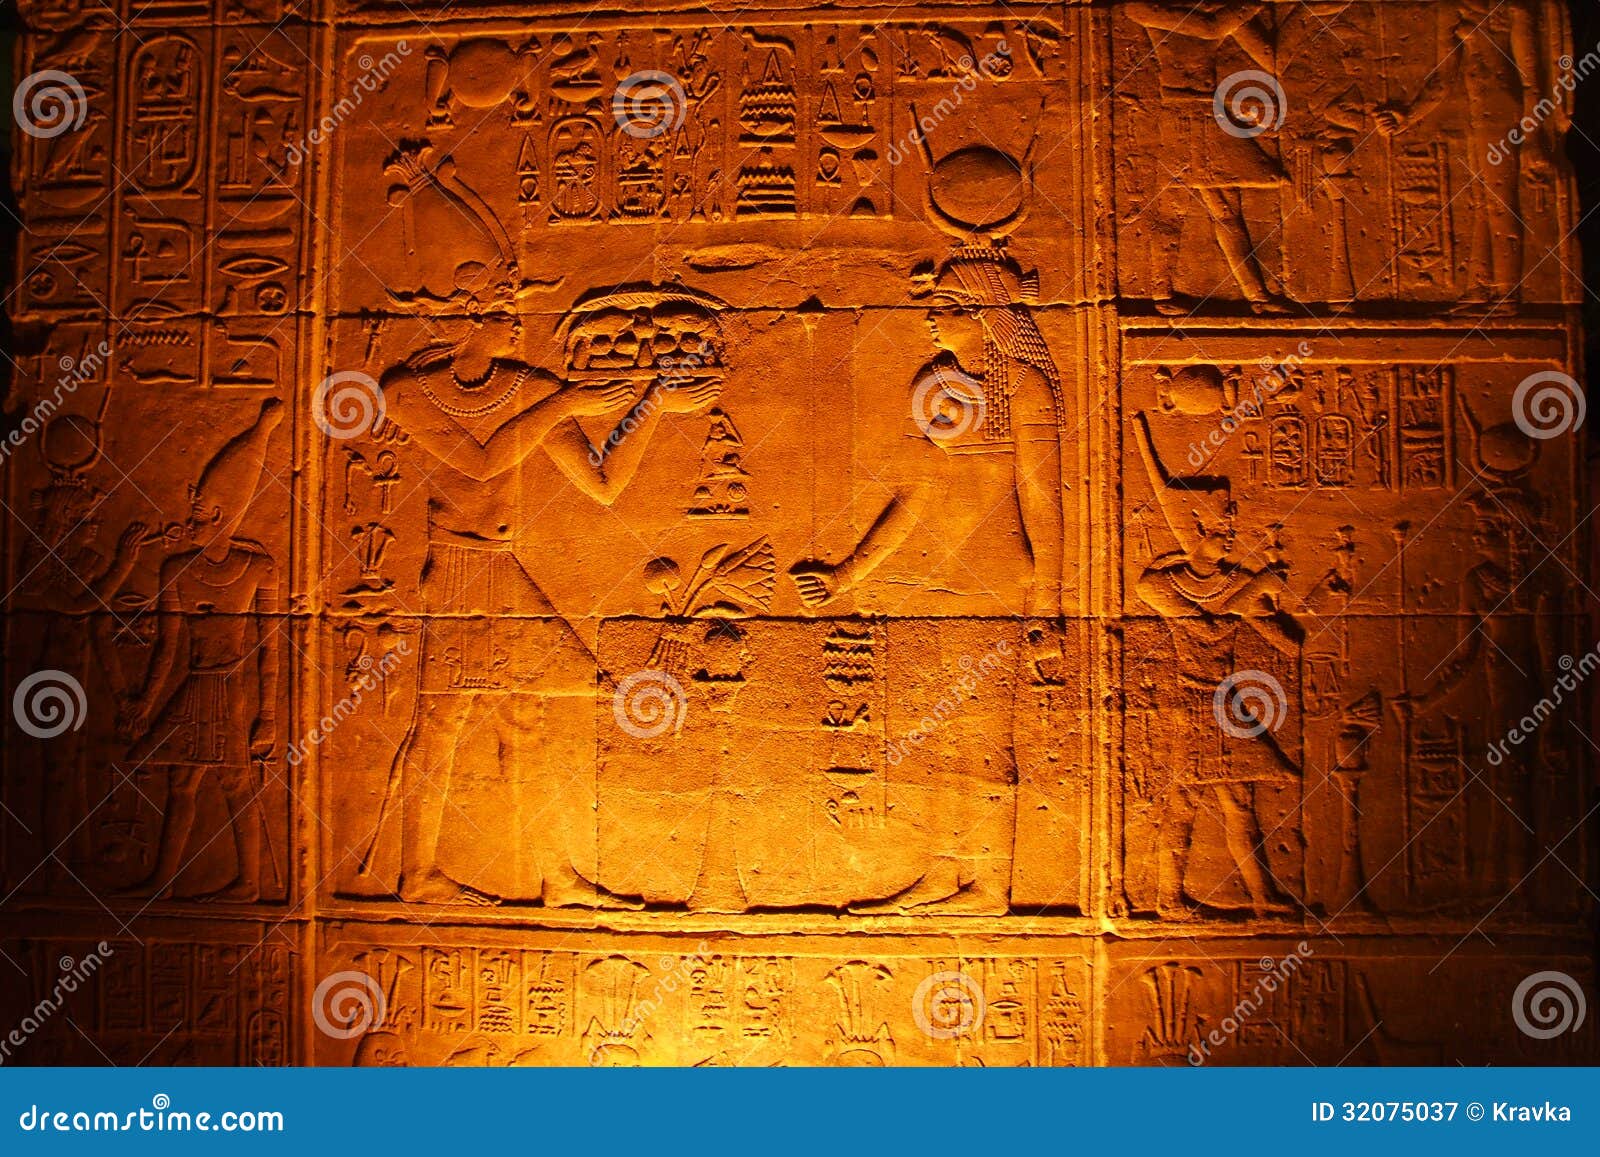 Ancient Egyptian Script Royalty Free Stock Photography - Image: 32075037